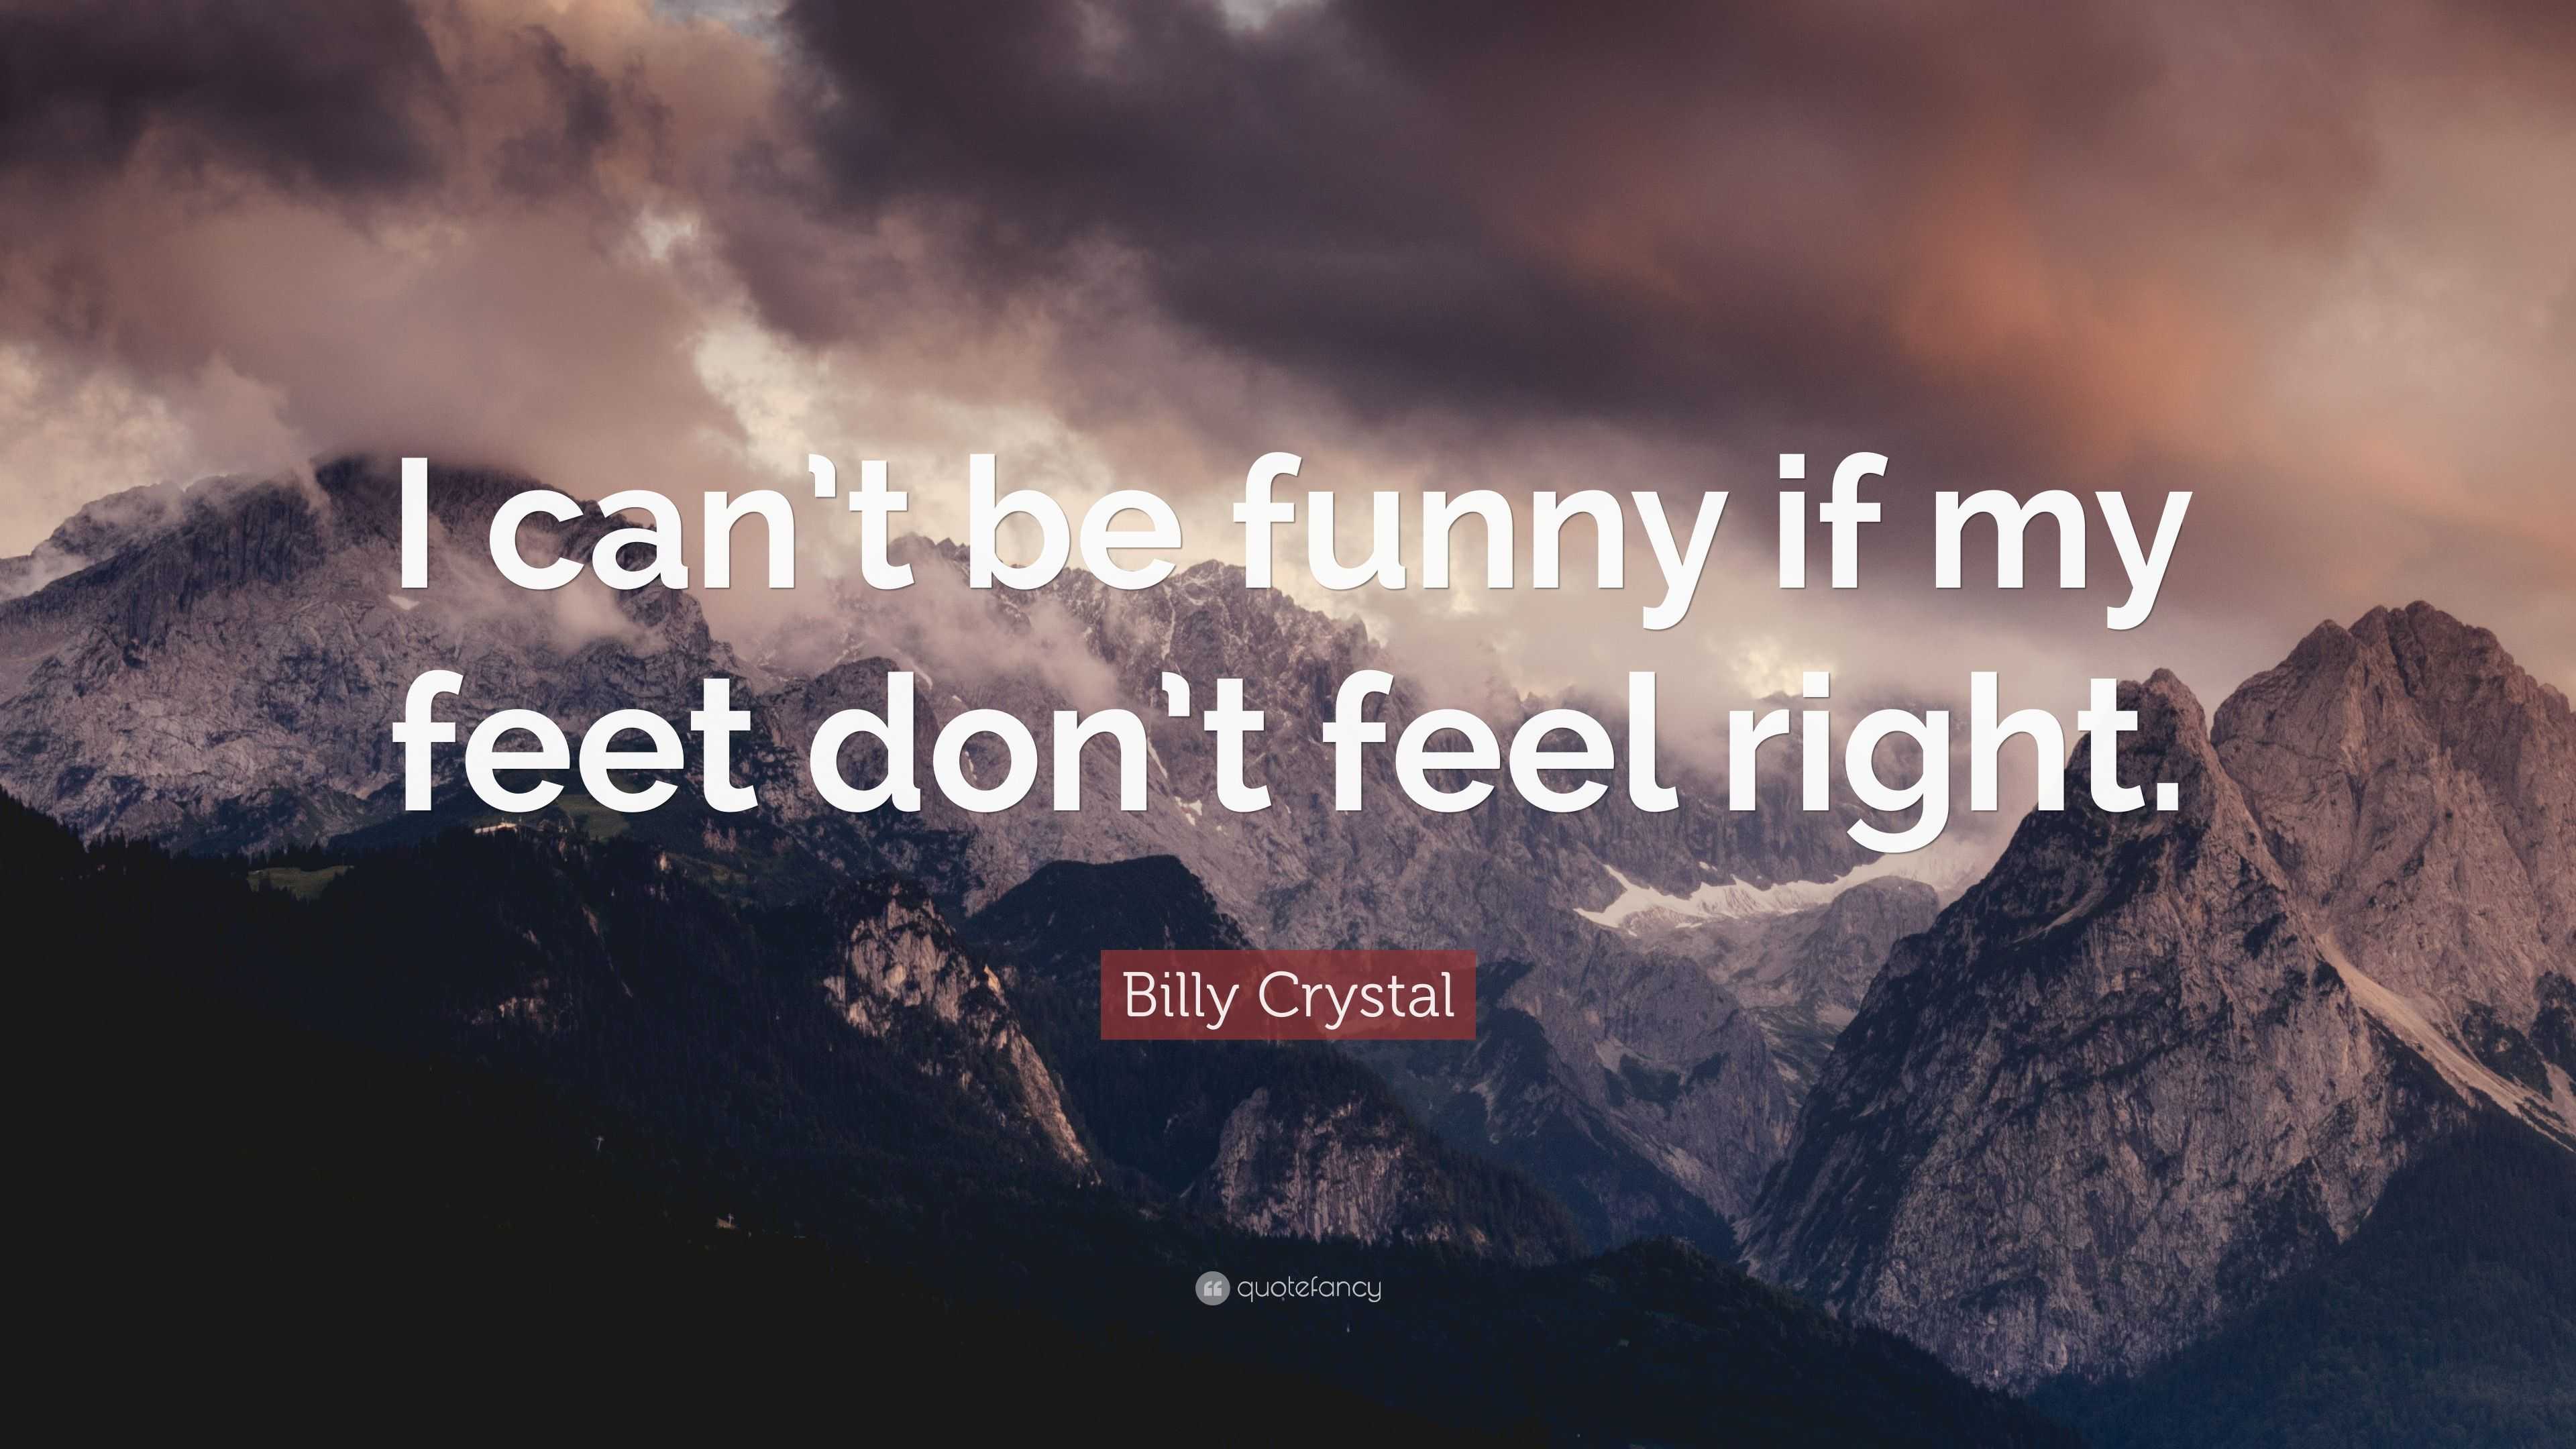 Billy Crystal Quote: "I can't be funny if my feet don't feel right." (10 wallpapers) - Quotefancy